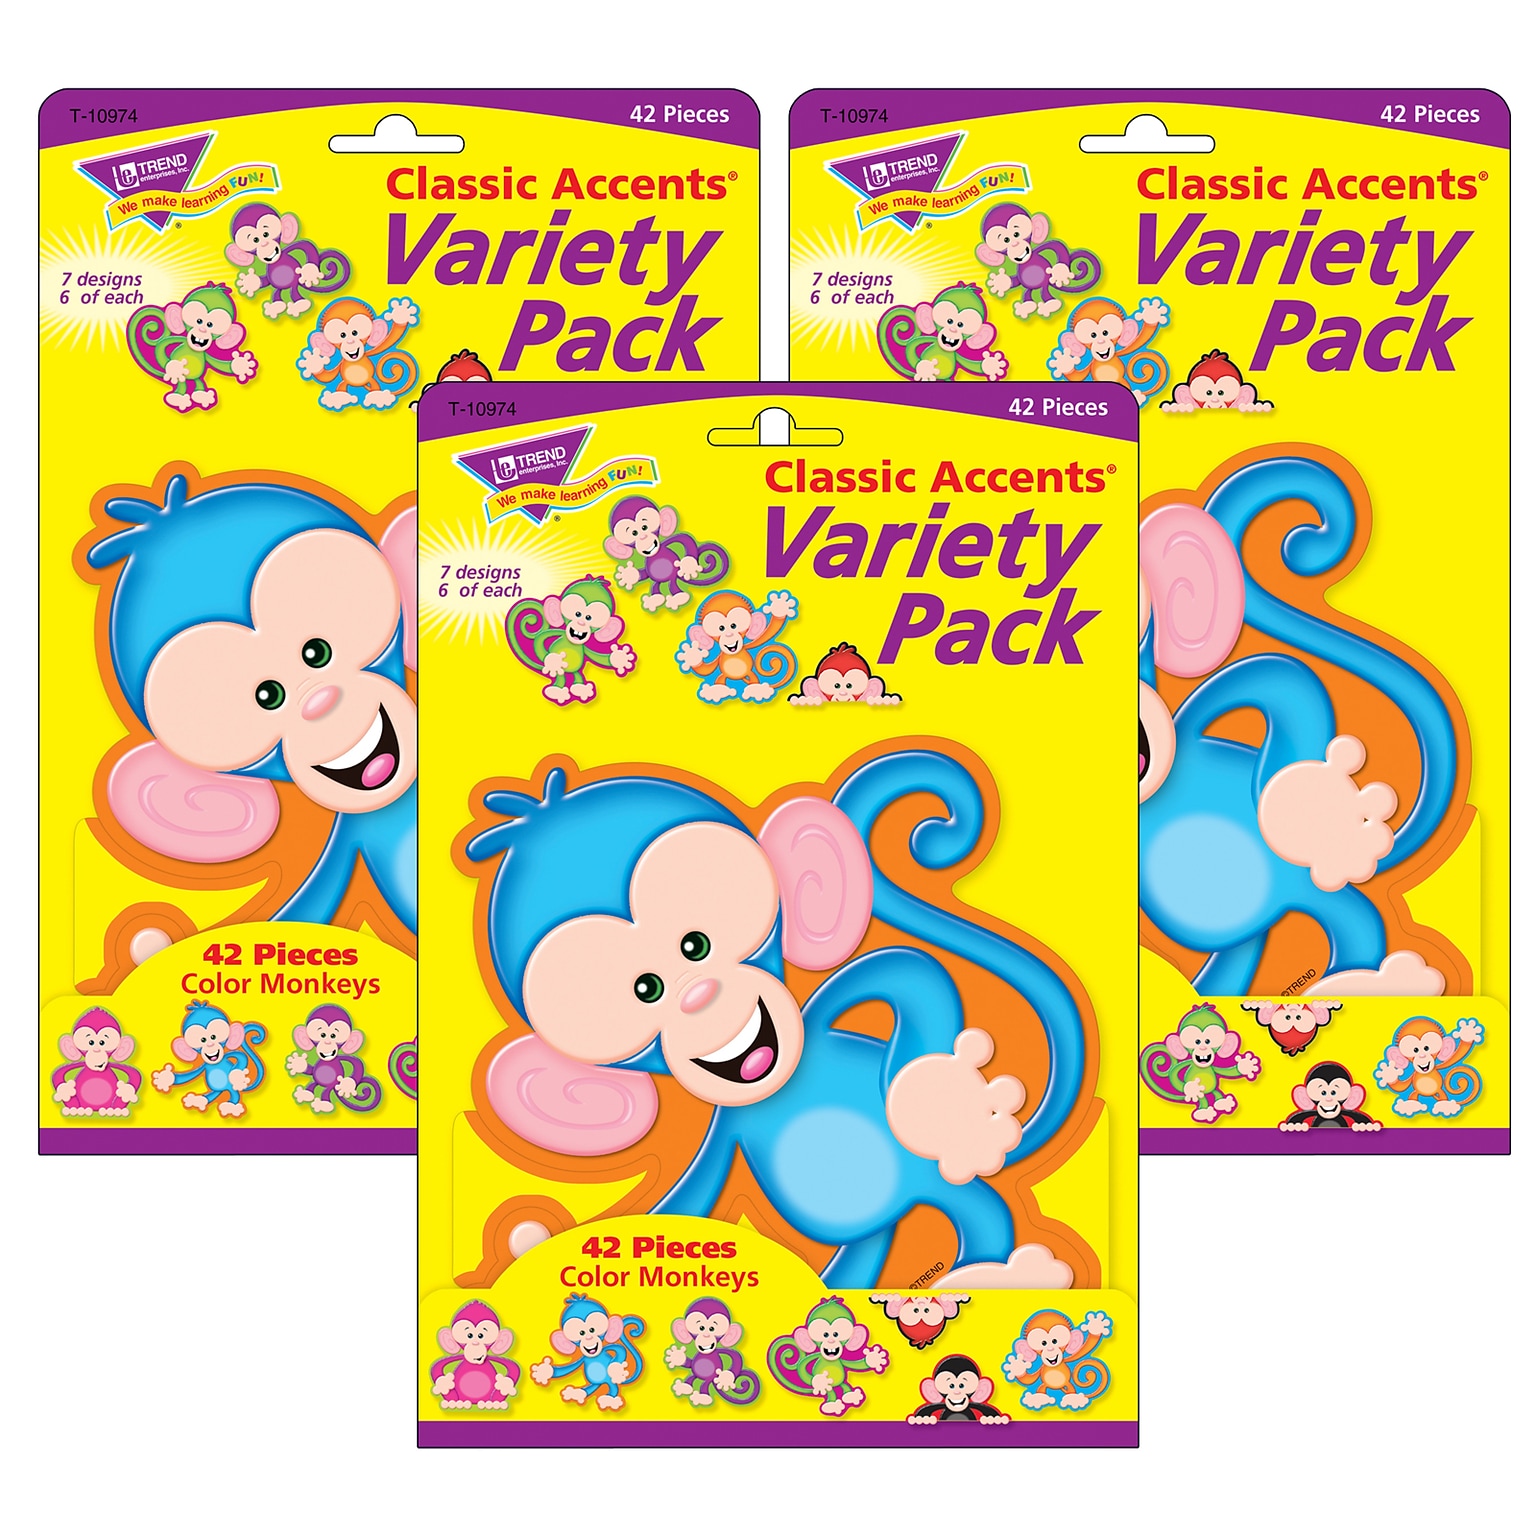 TREND Color Monkeys Classic Accents Variety Pack, 42 Per Pack, 3 Packs (T-10974-3)